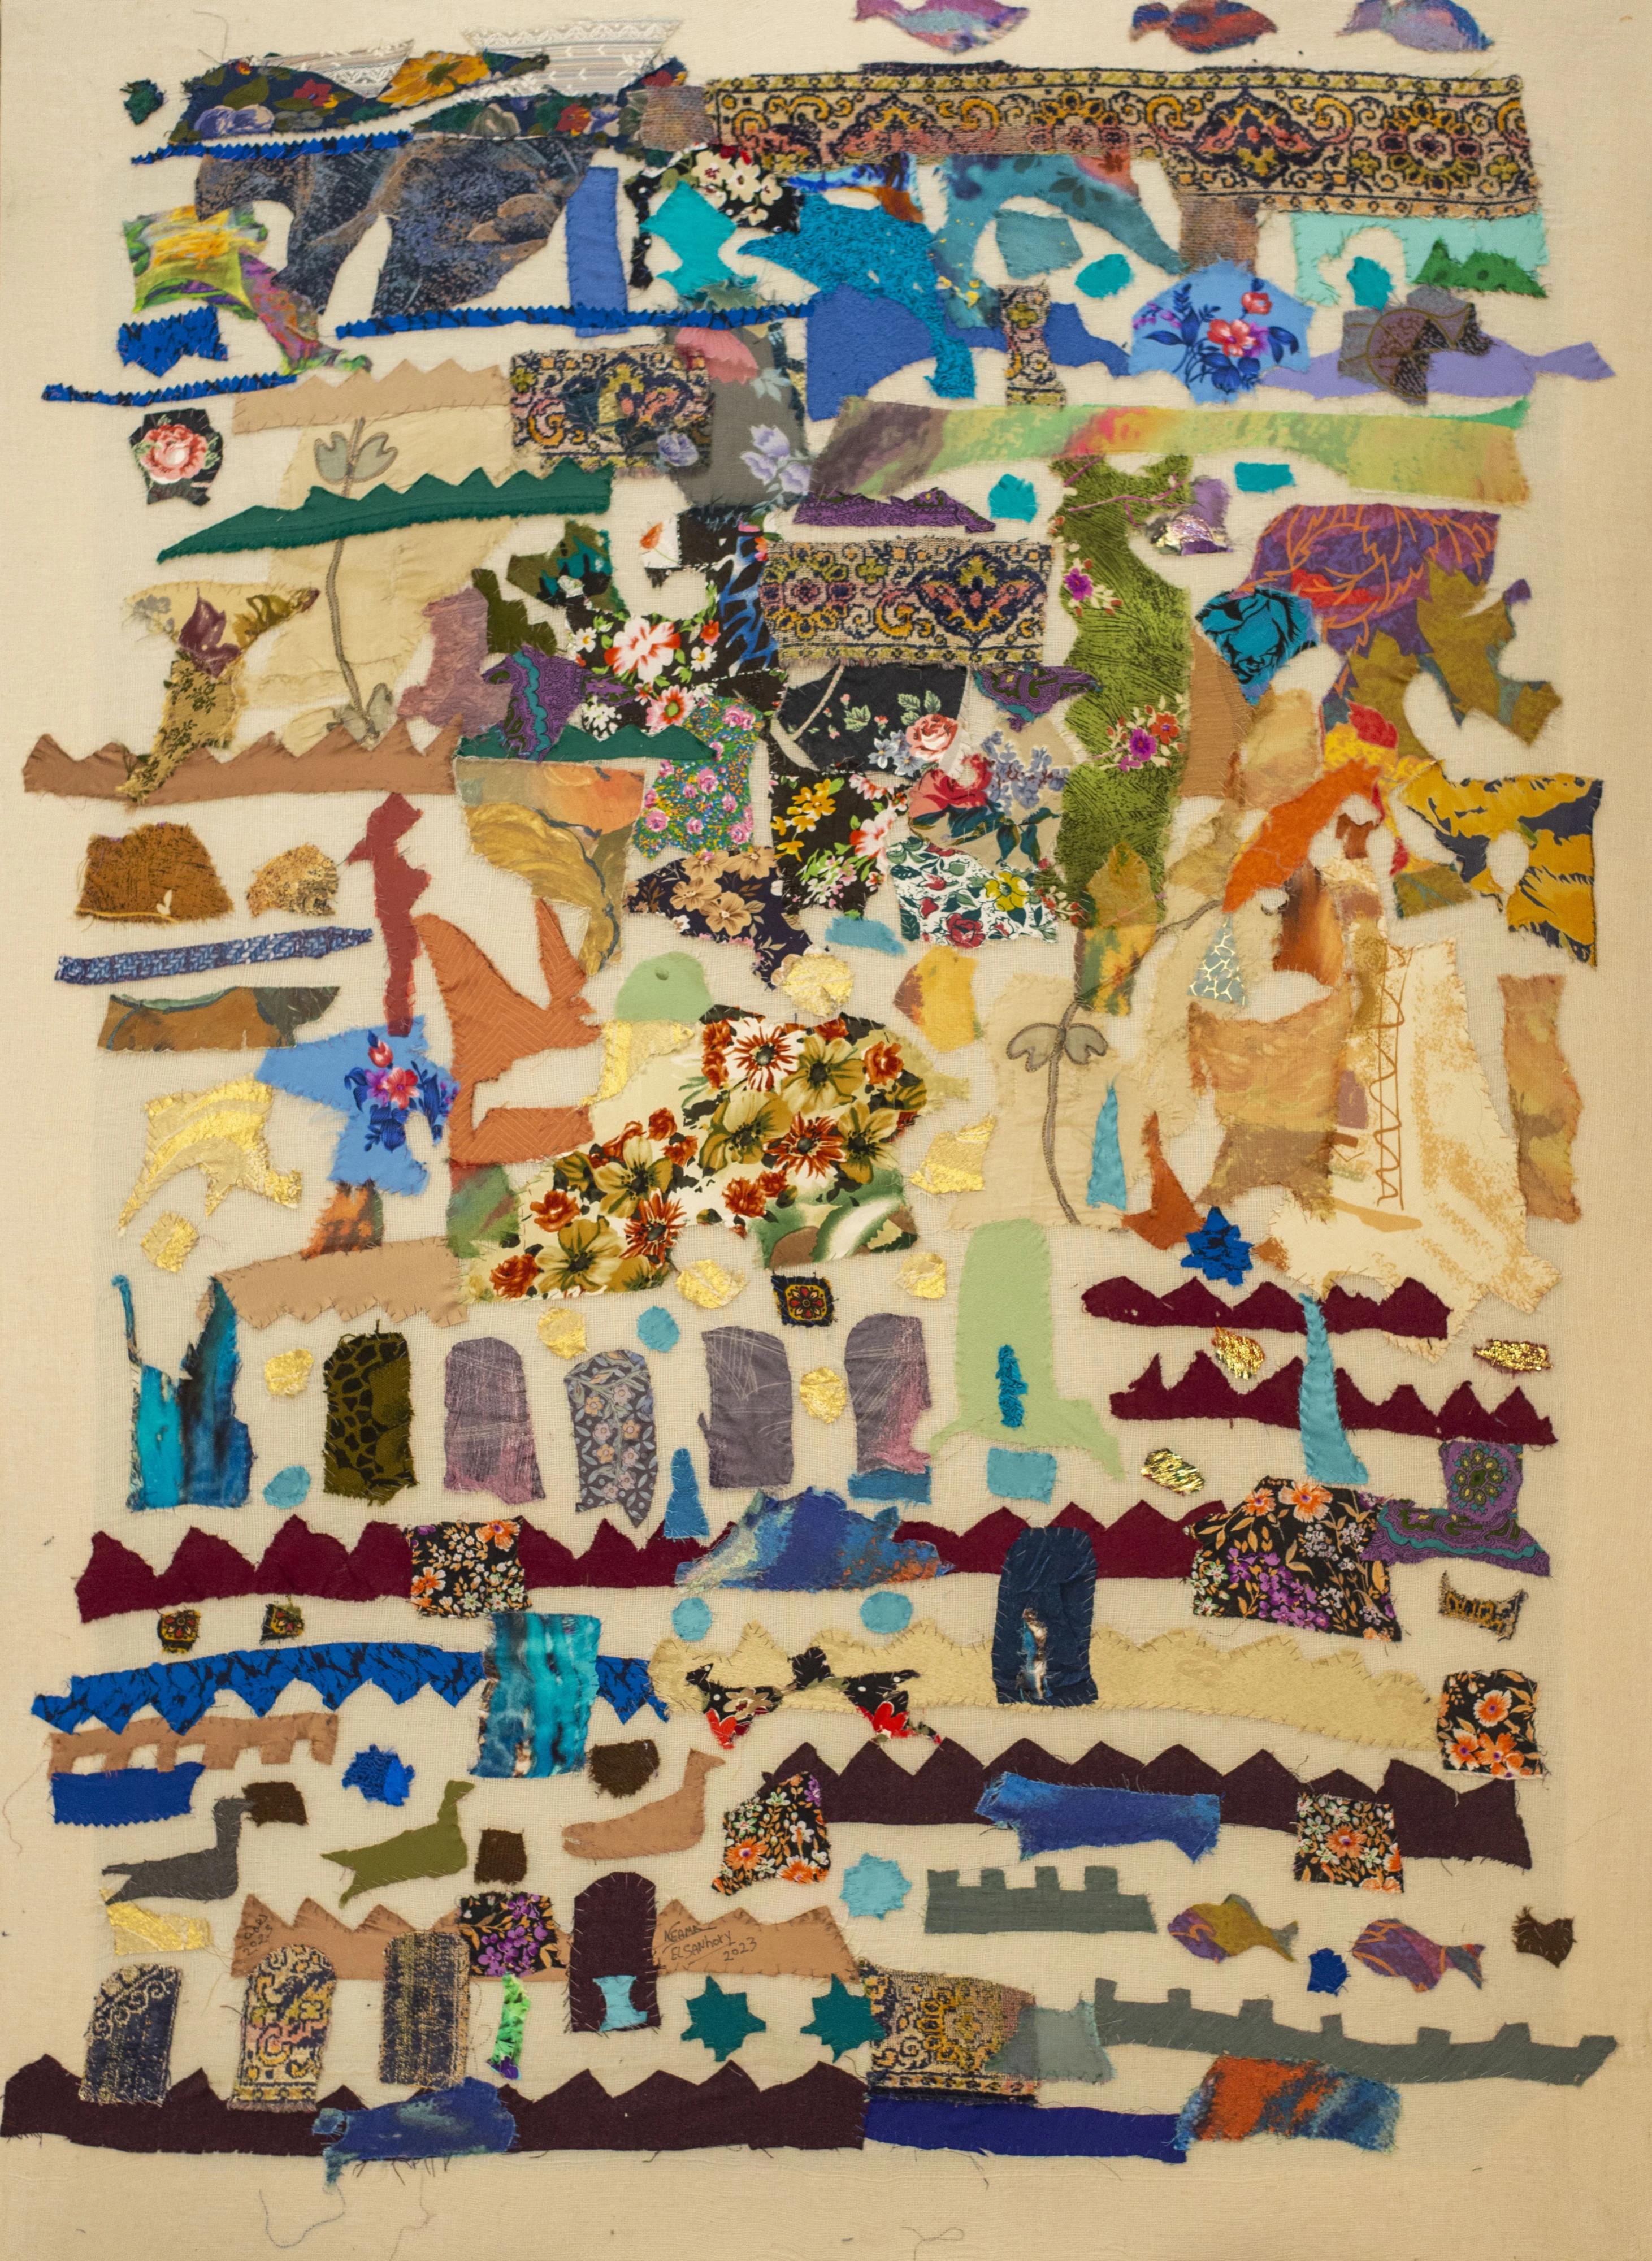 "Hallowed Ground" 47" x 33" inch by Neama El Sanhoury

Medium: fabric appliqué on linen

"Fragments of Time" series: 
Ultimately, El Sanhoury’s work is contemplated and generated in a thoroughly modern constitution that appeals to and imparts upon